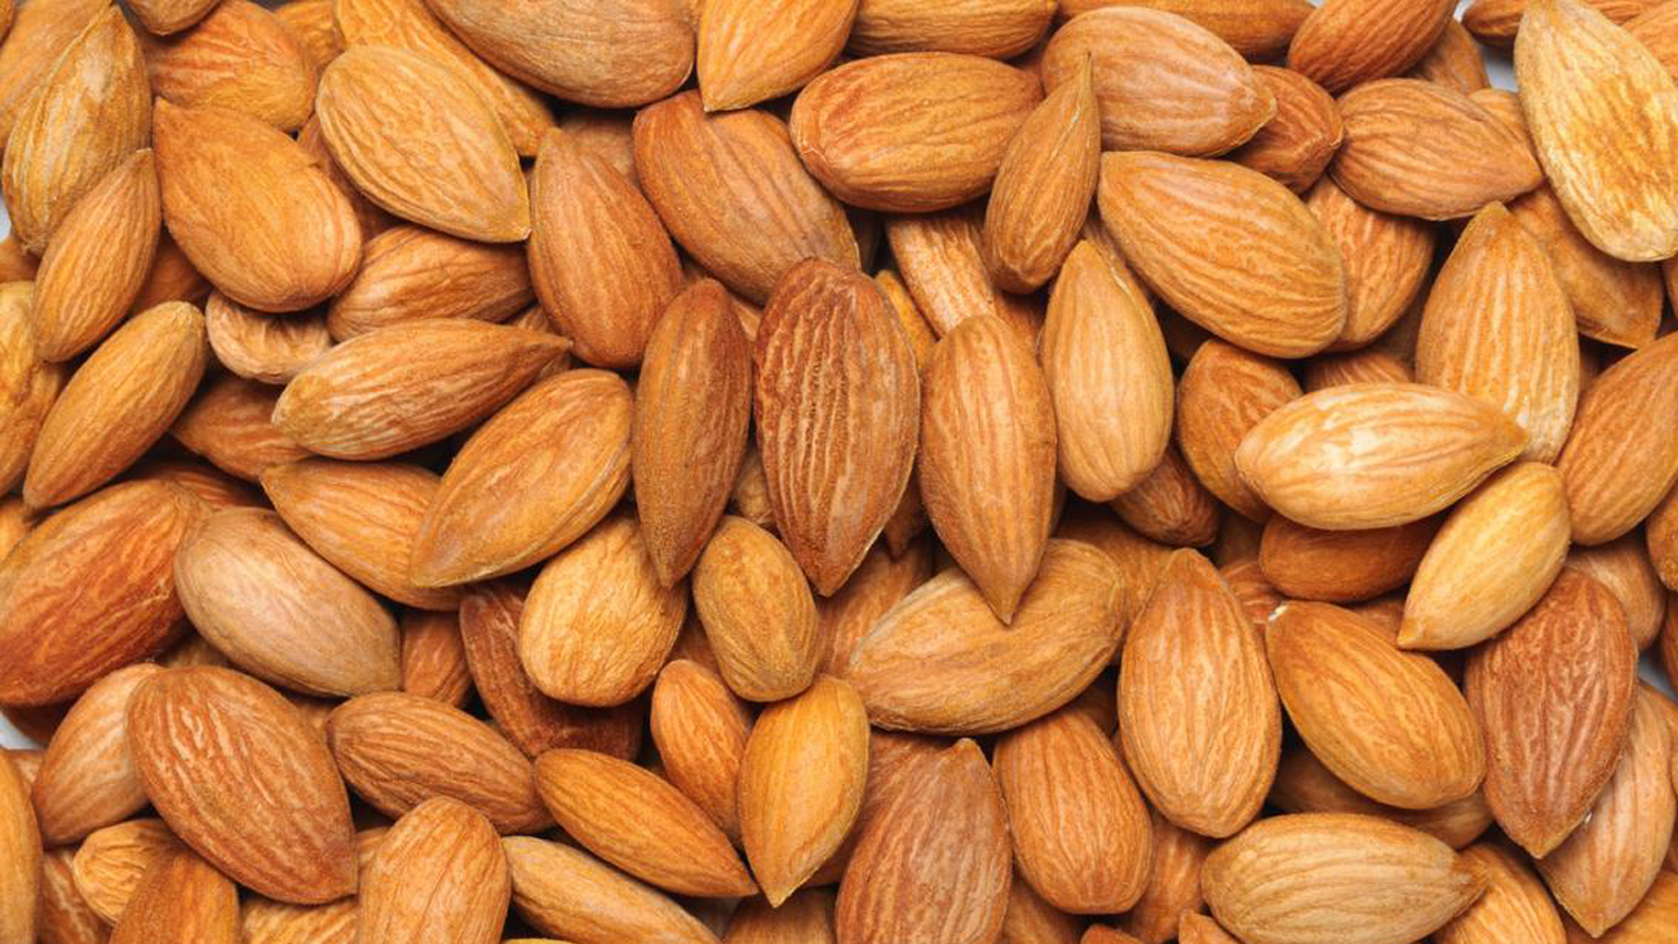 What's the link between almonds, PESTEL and water?